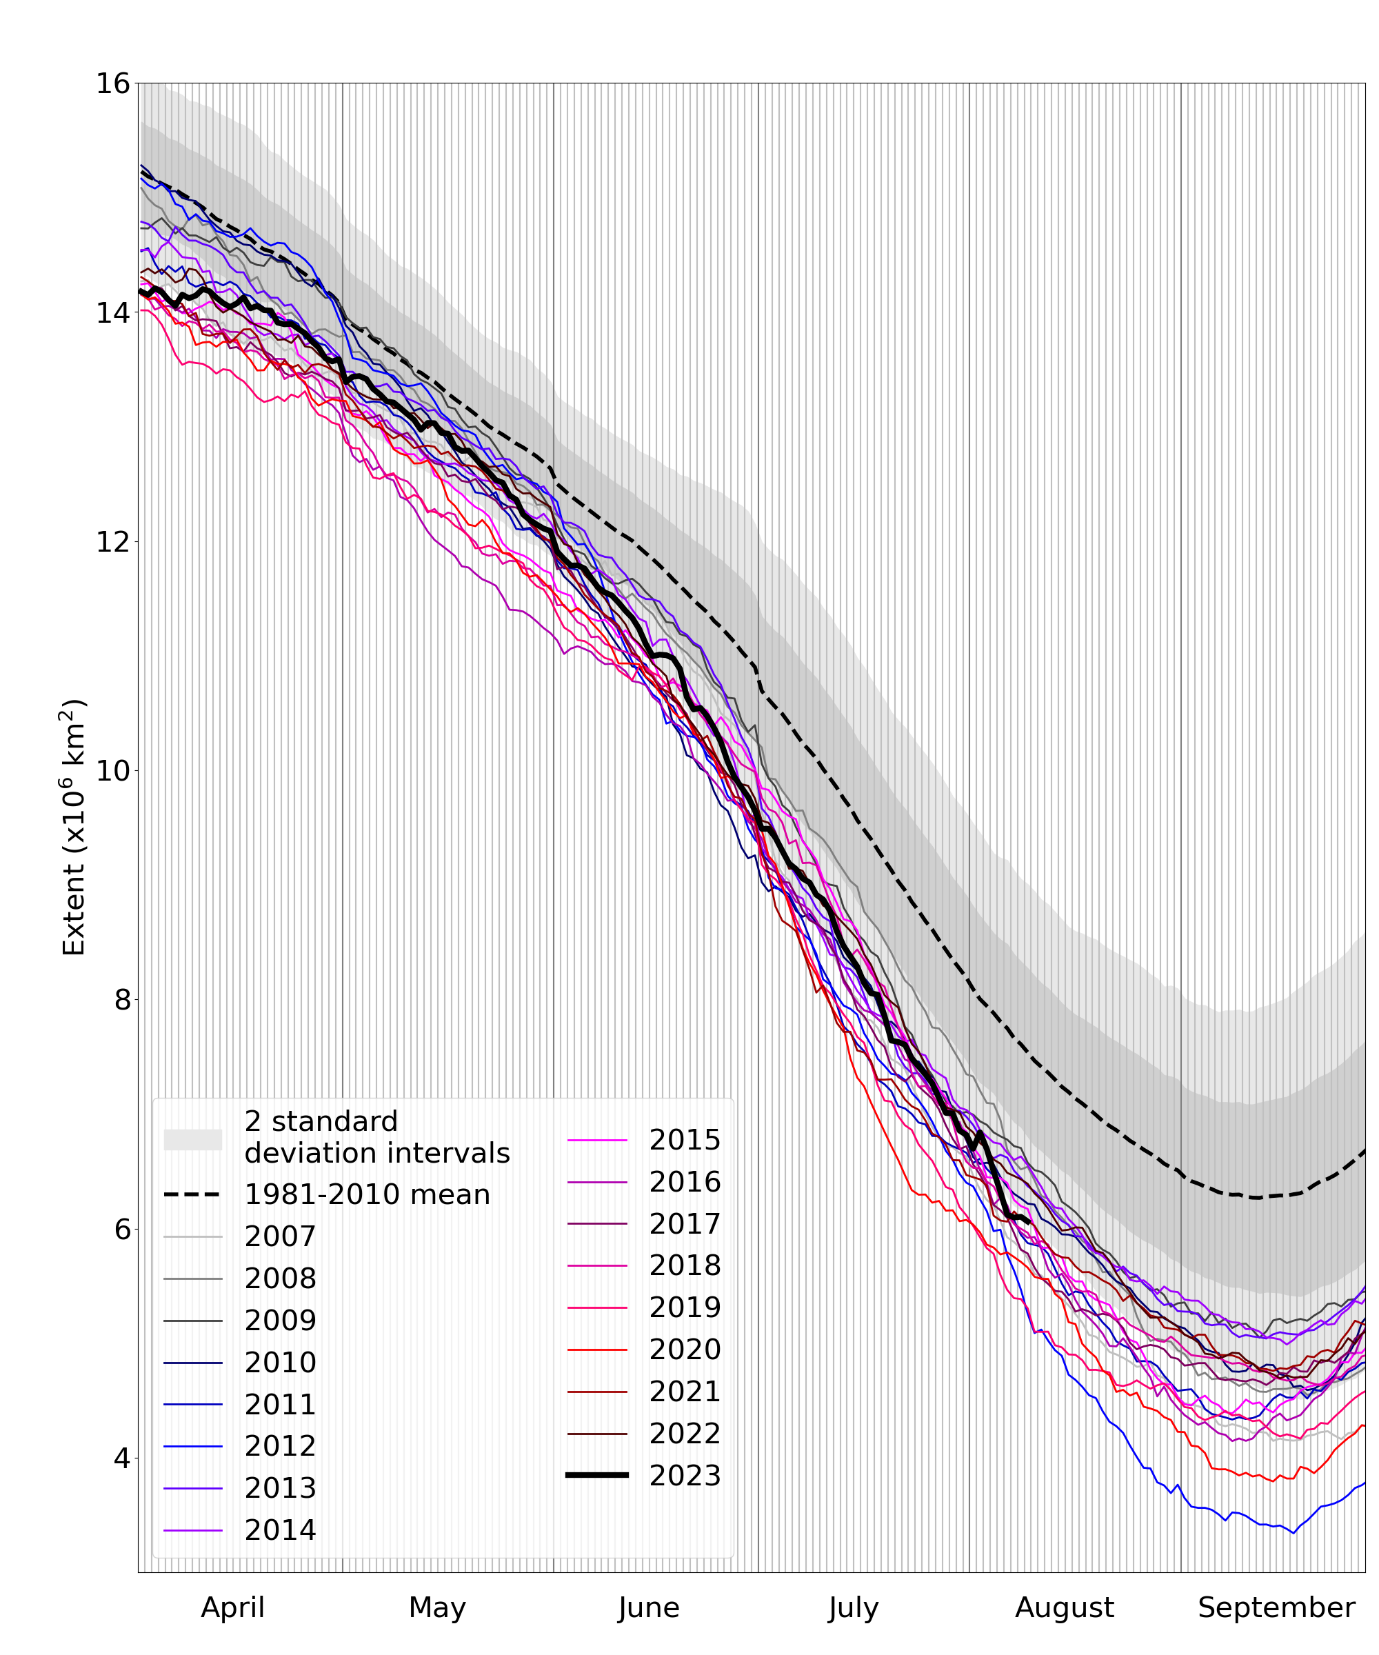 Daily Arctic sea ice extent for 2023, compared with recent years and the 1981-2010 average with ± 1 and 2 standard deviation intervals indicated by the shaded areas. Data are from the National Snow and Ice Data Center (NSIDC).